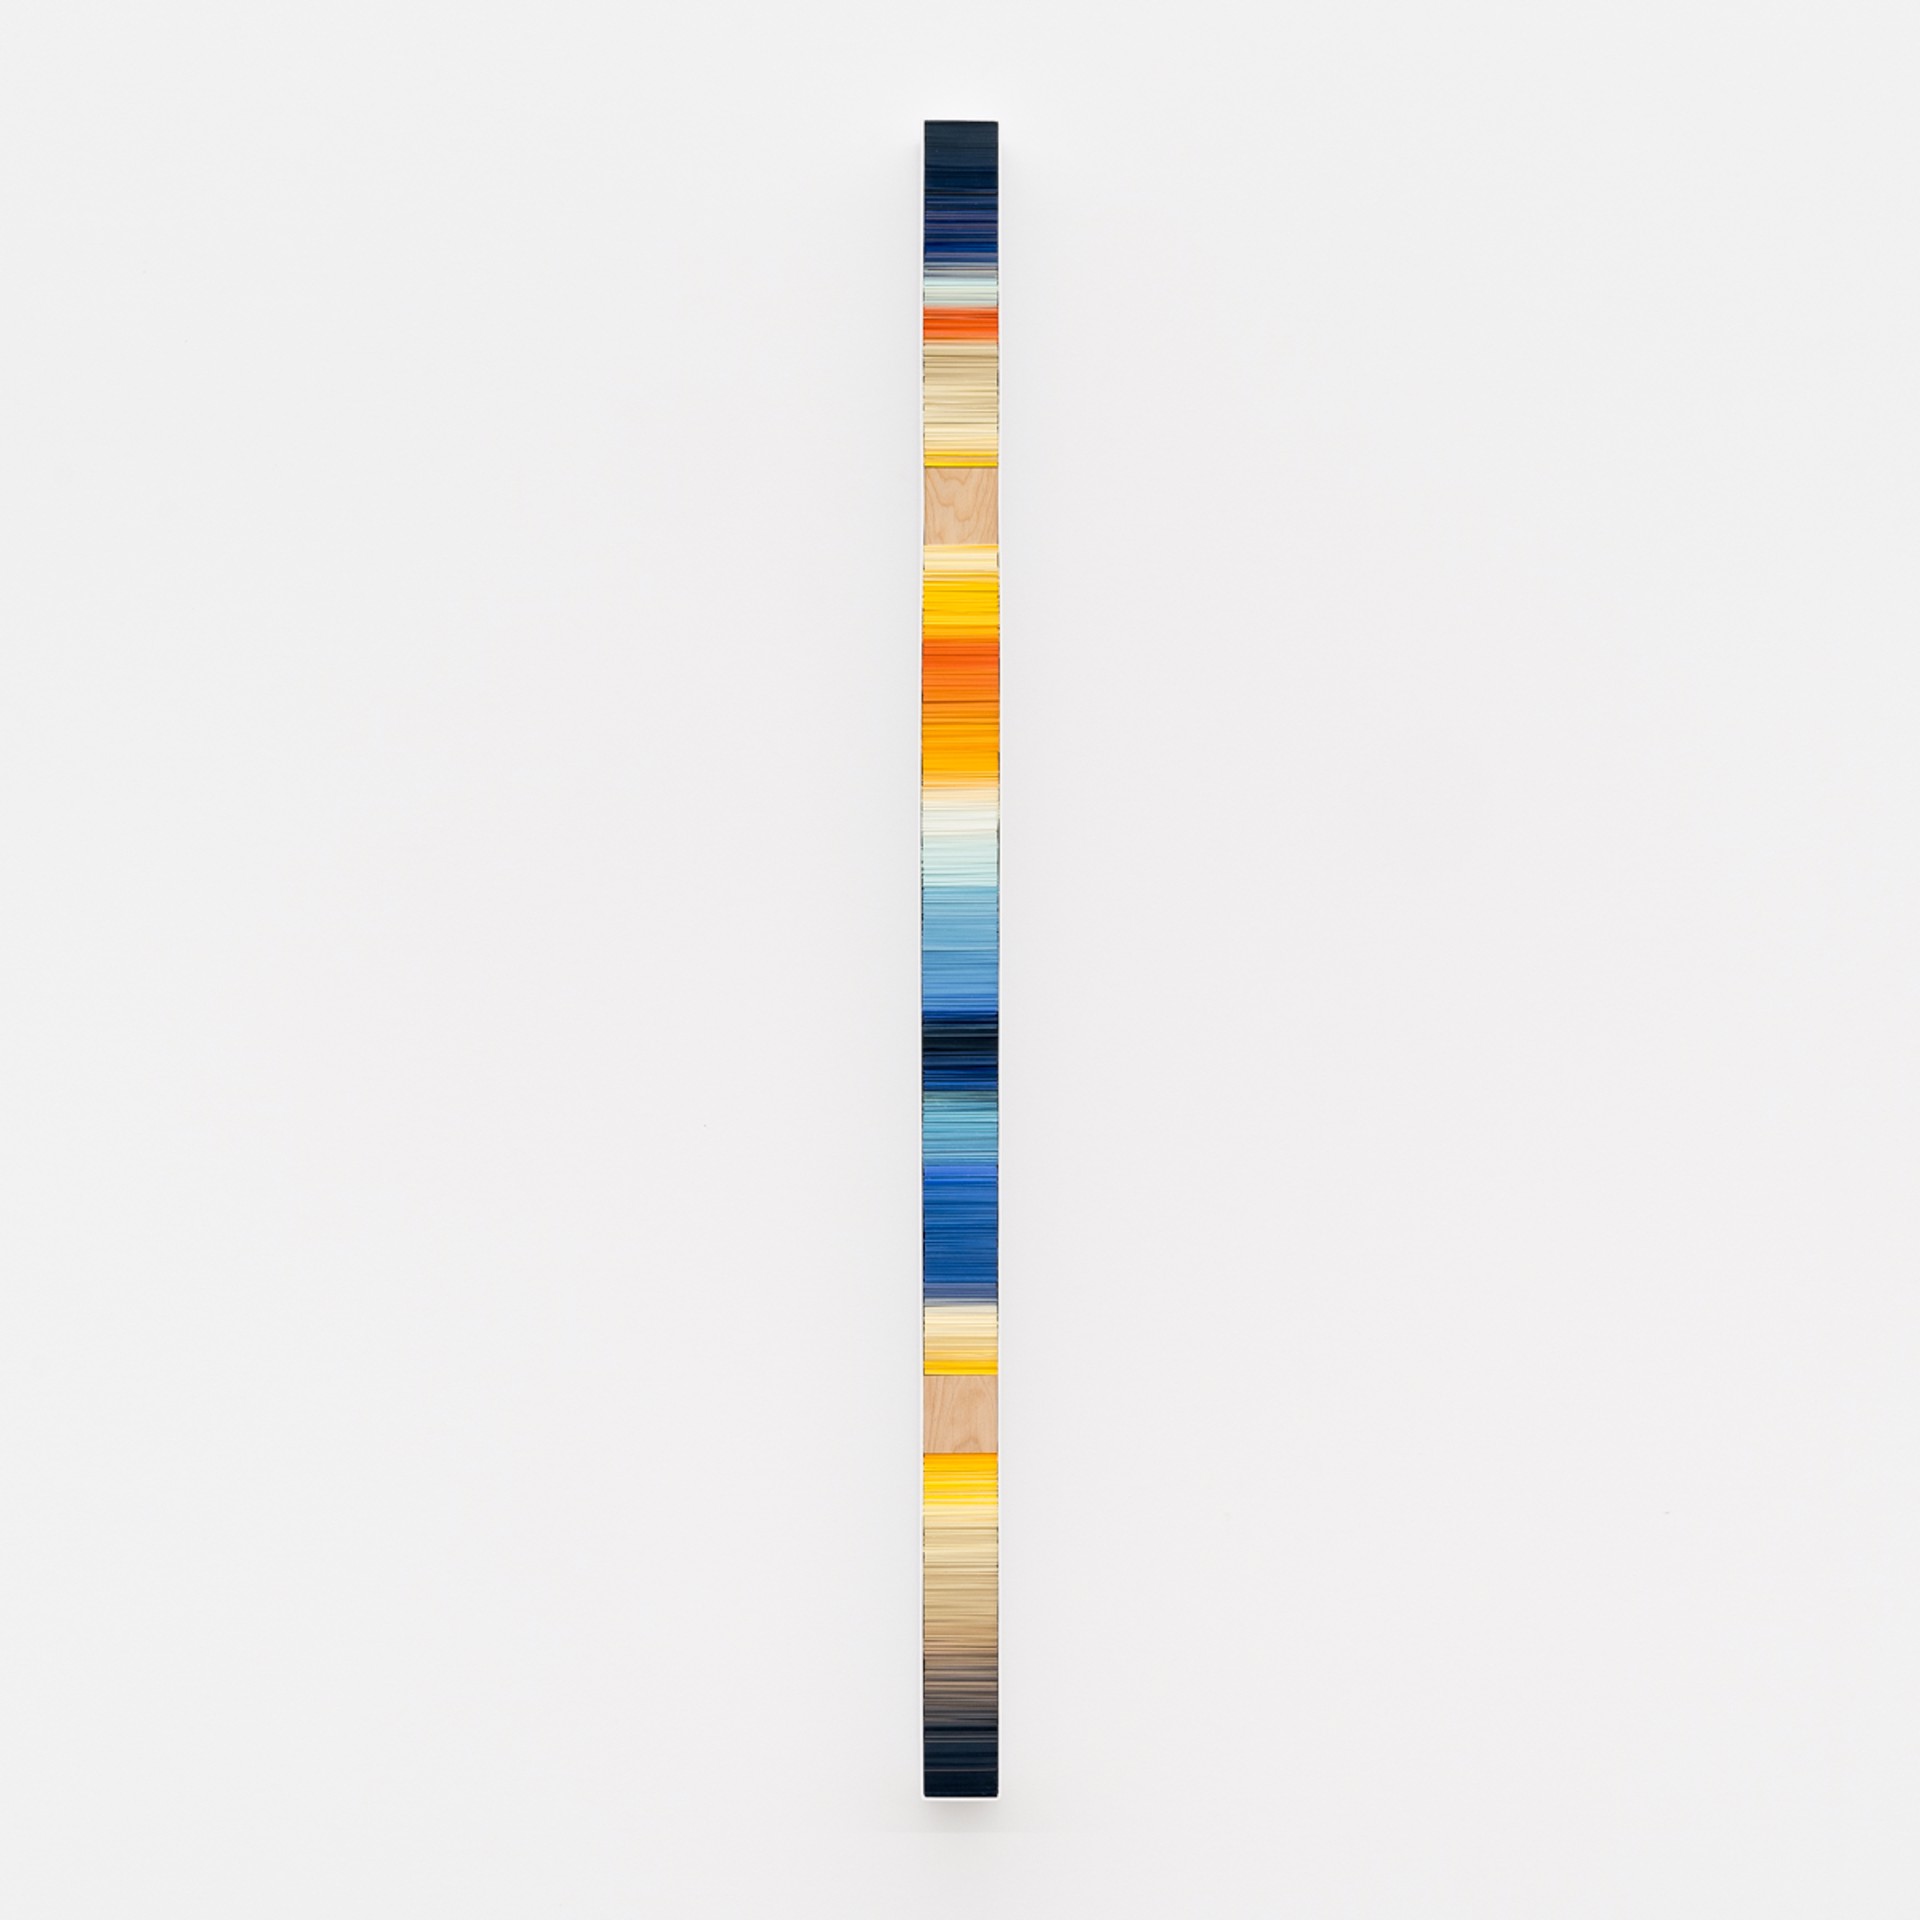 Mood thermometer / Series 3 no. 1 by Karine Demers